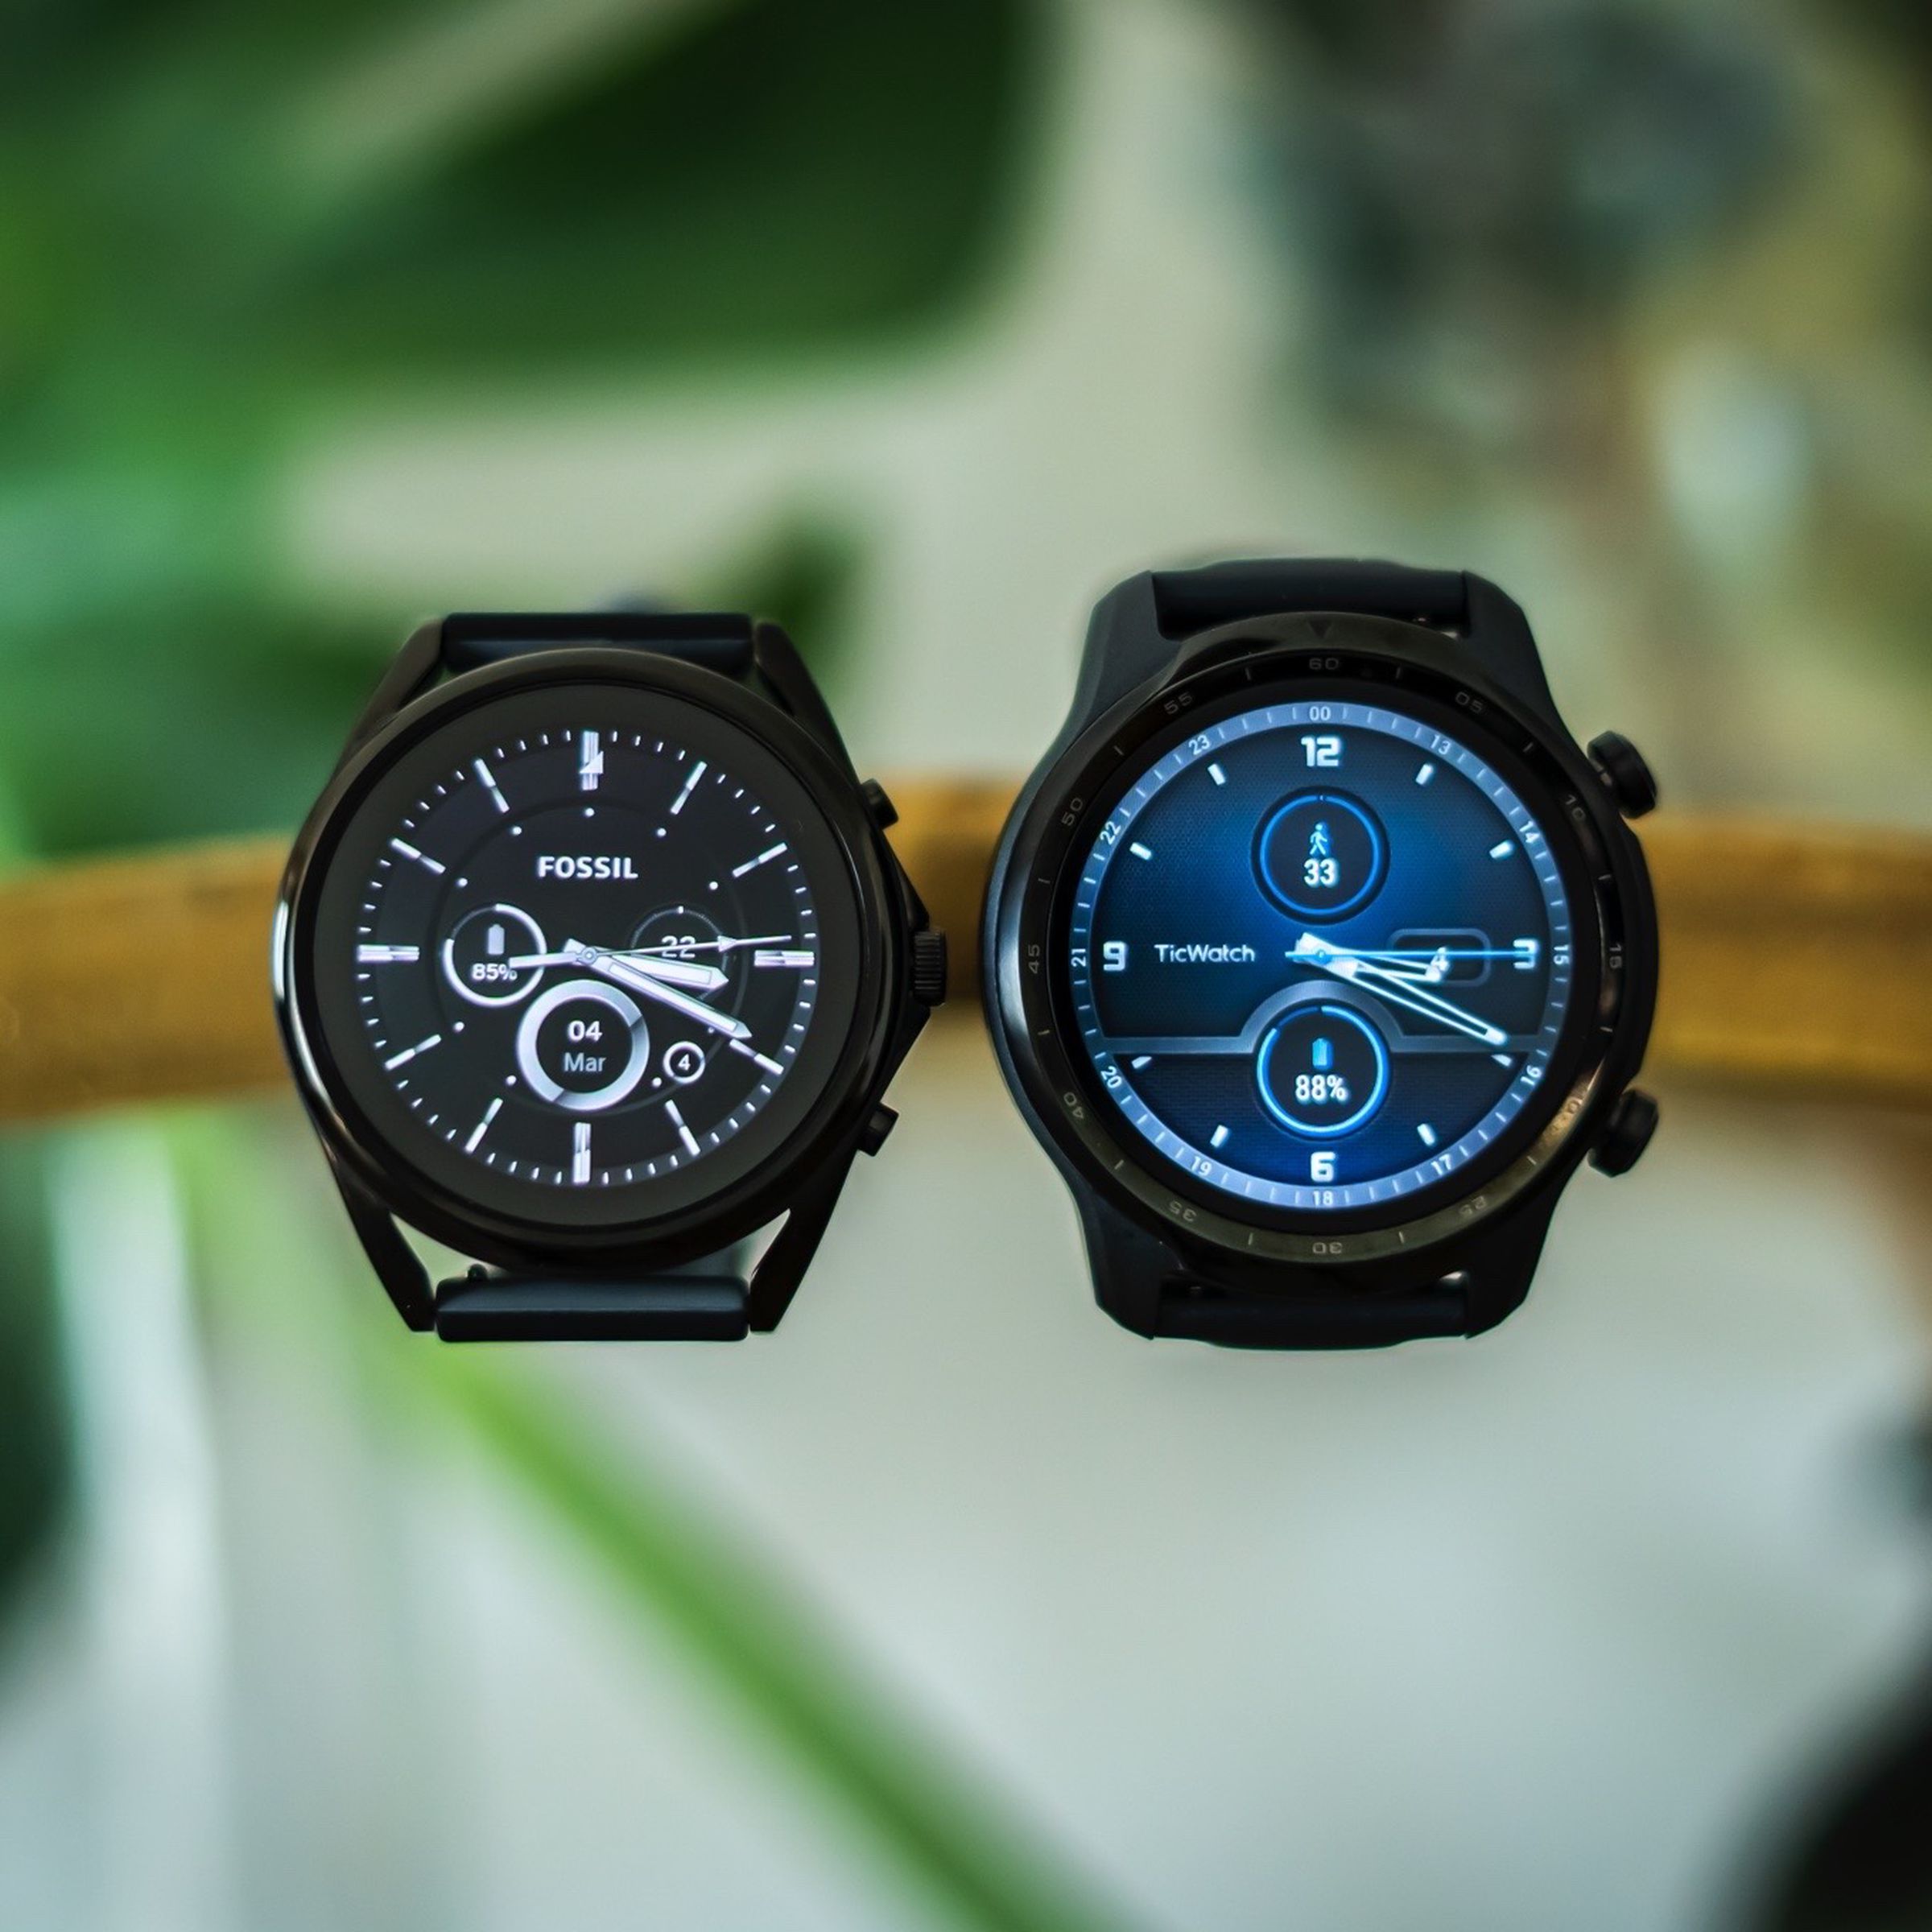 The Fossil Gen 5 LTE and Mobvoi TicWatch Pro 3